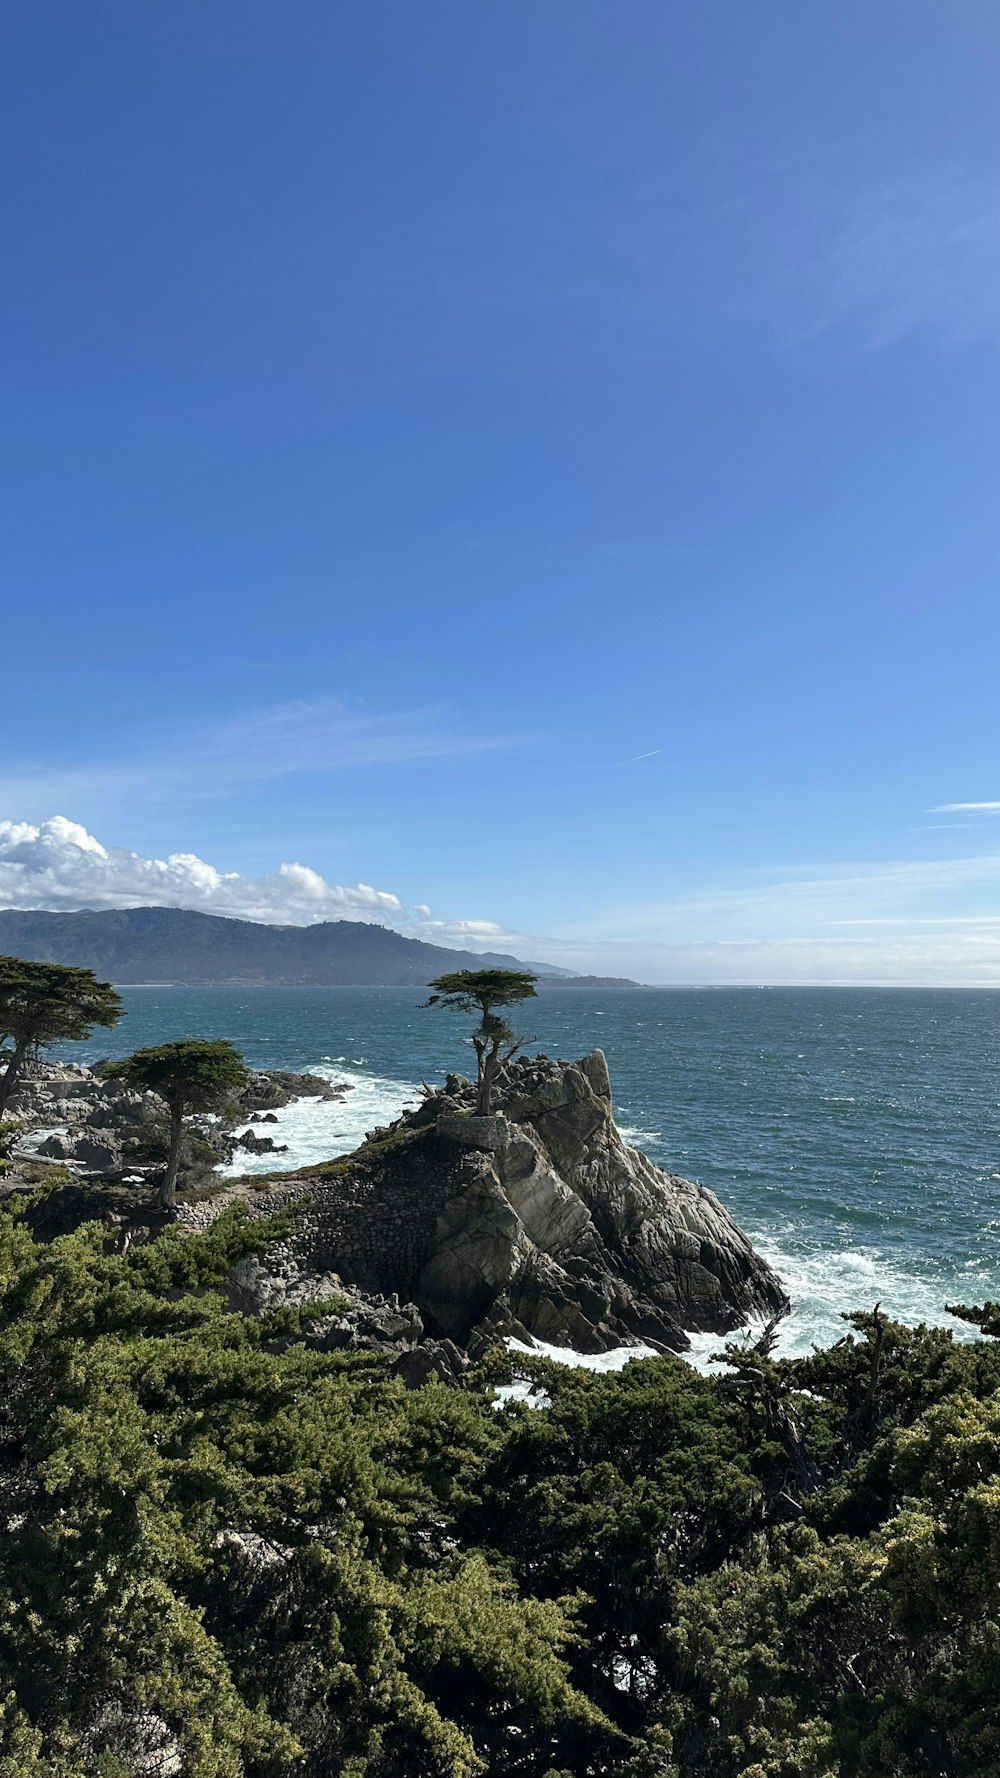 a lone tree on a rocky outcropping by the ocean